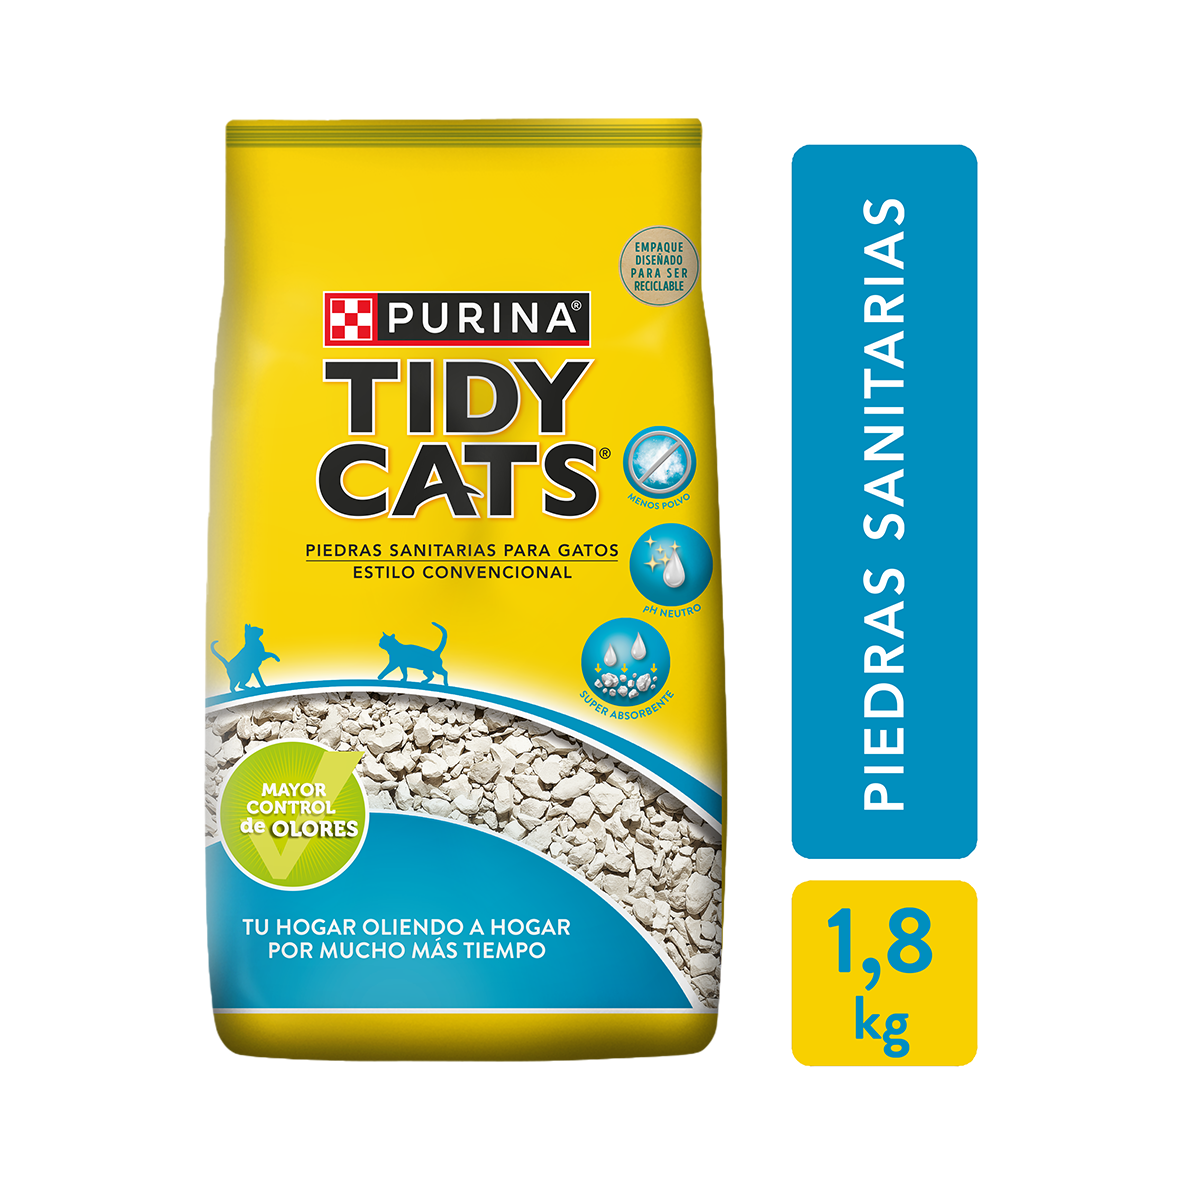 Purina_Tidy_Cats_PSPG_0.png